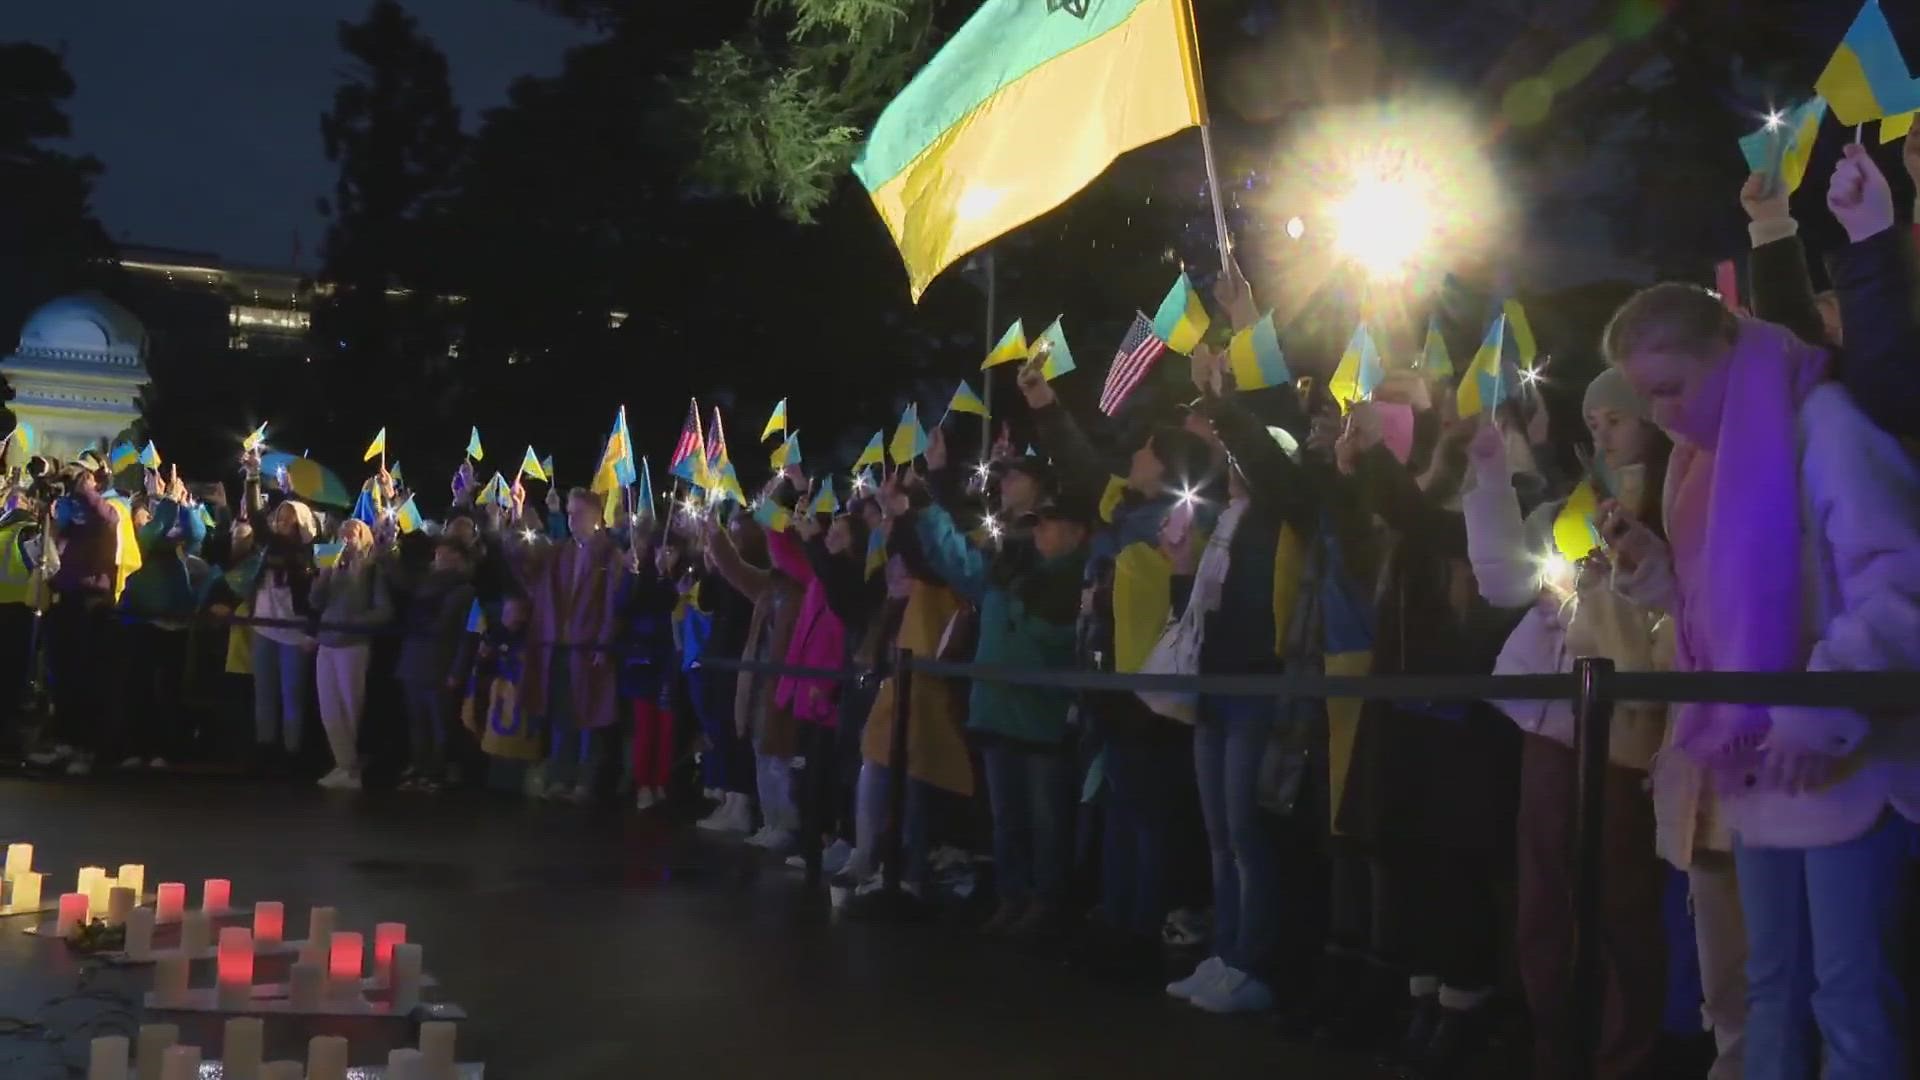 The rally brought hundreds of people together in support of Ukraine exactly one year after the Russian-Ukraine war began.